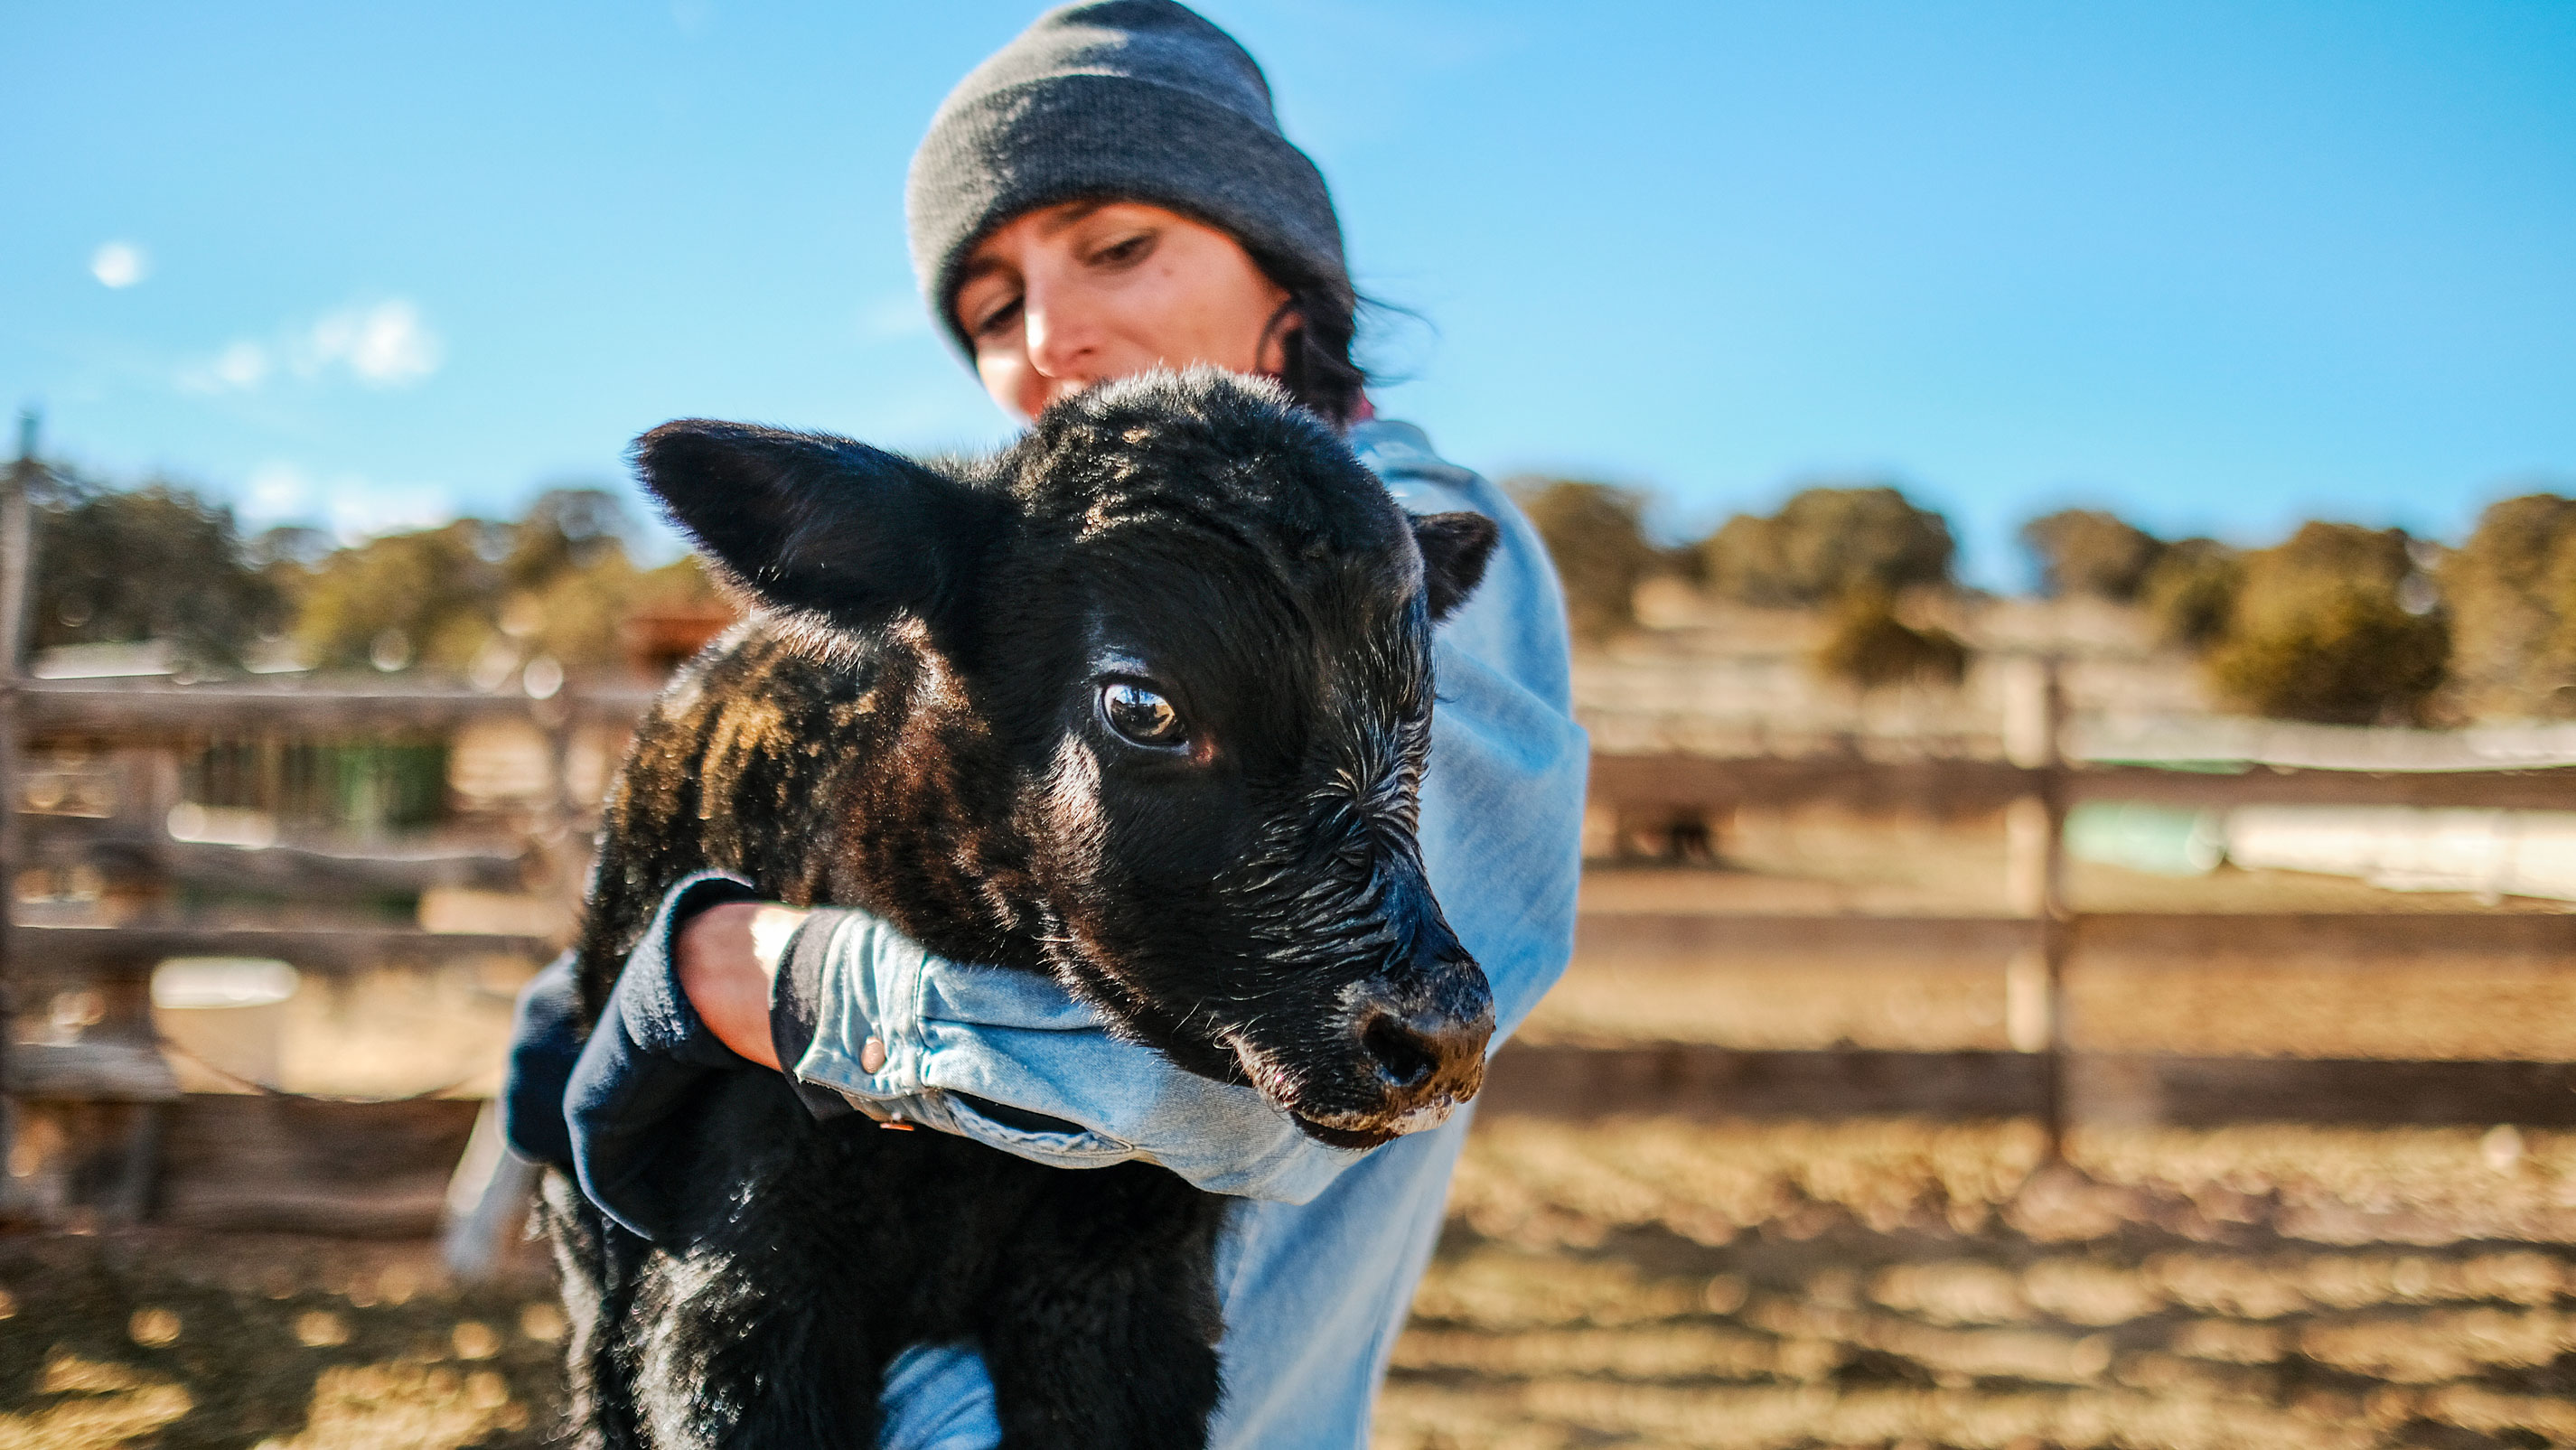 A woman holding up a baby cow on a ranch